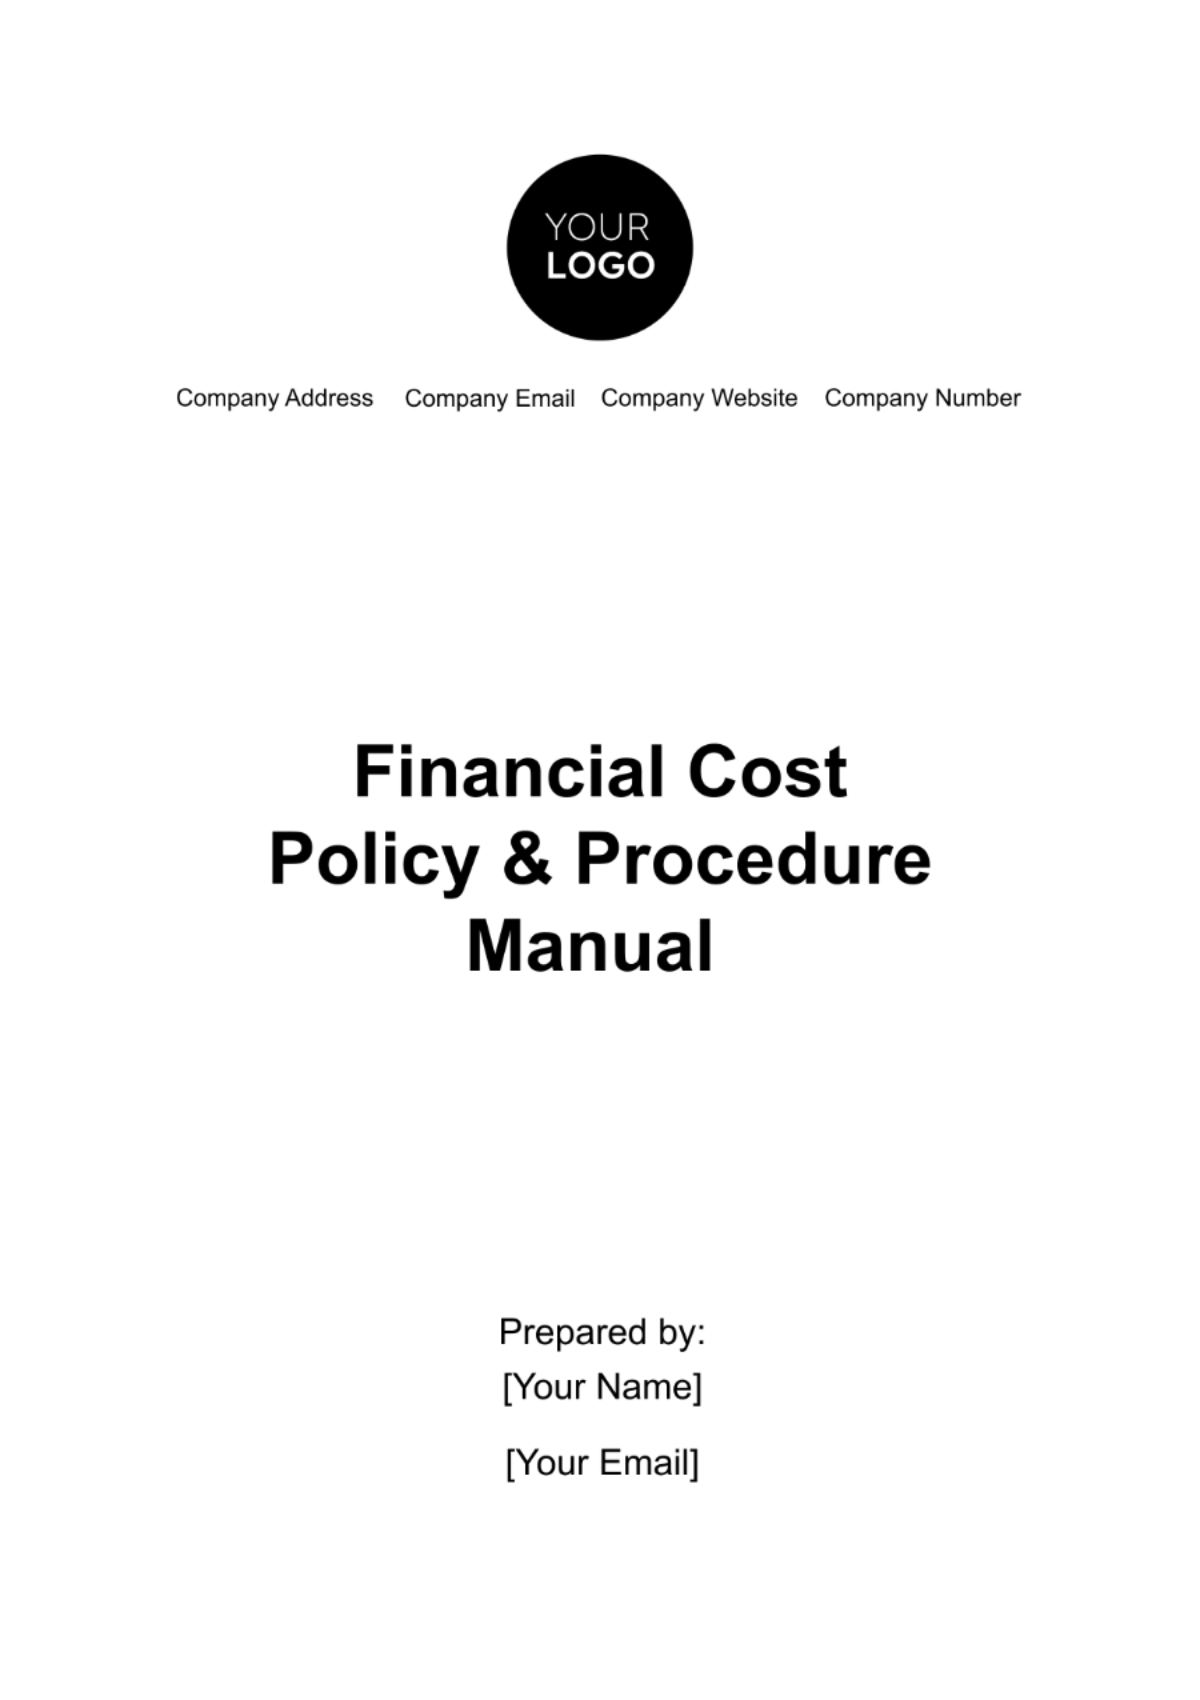 Financial Cost Policy & Procedure Manual Template